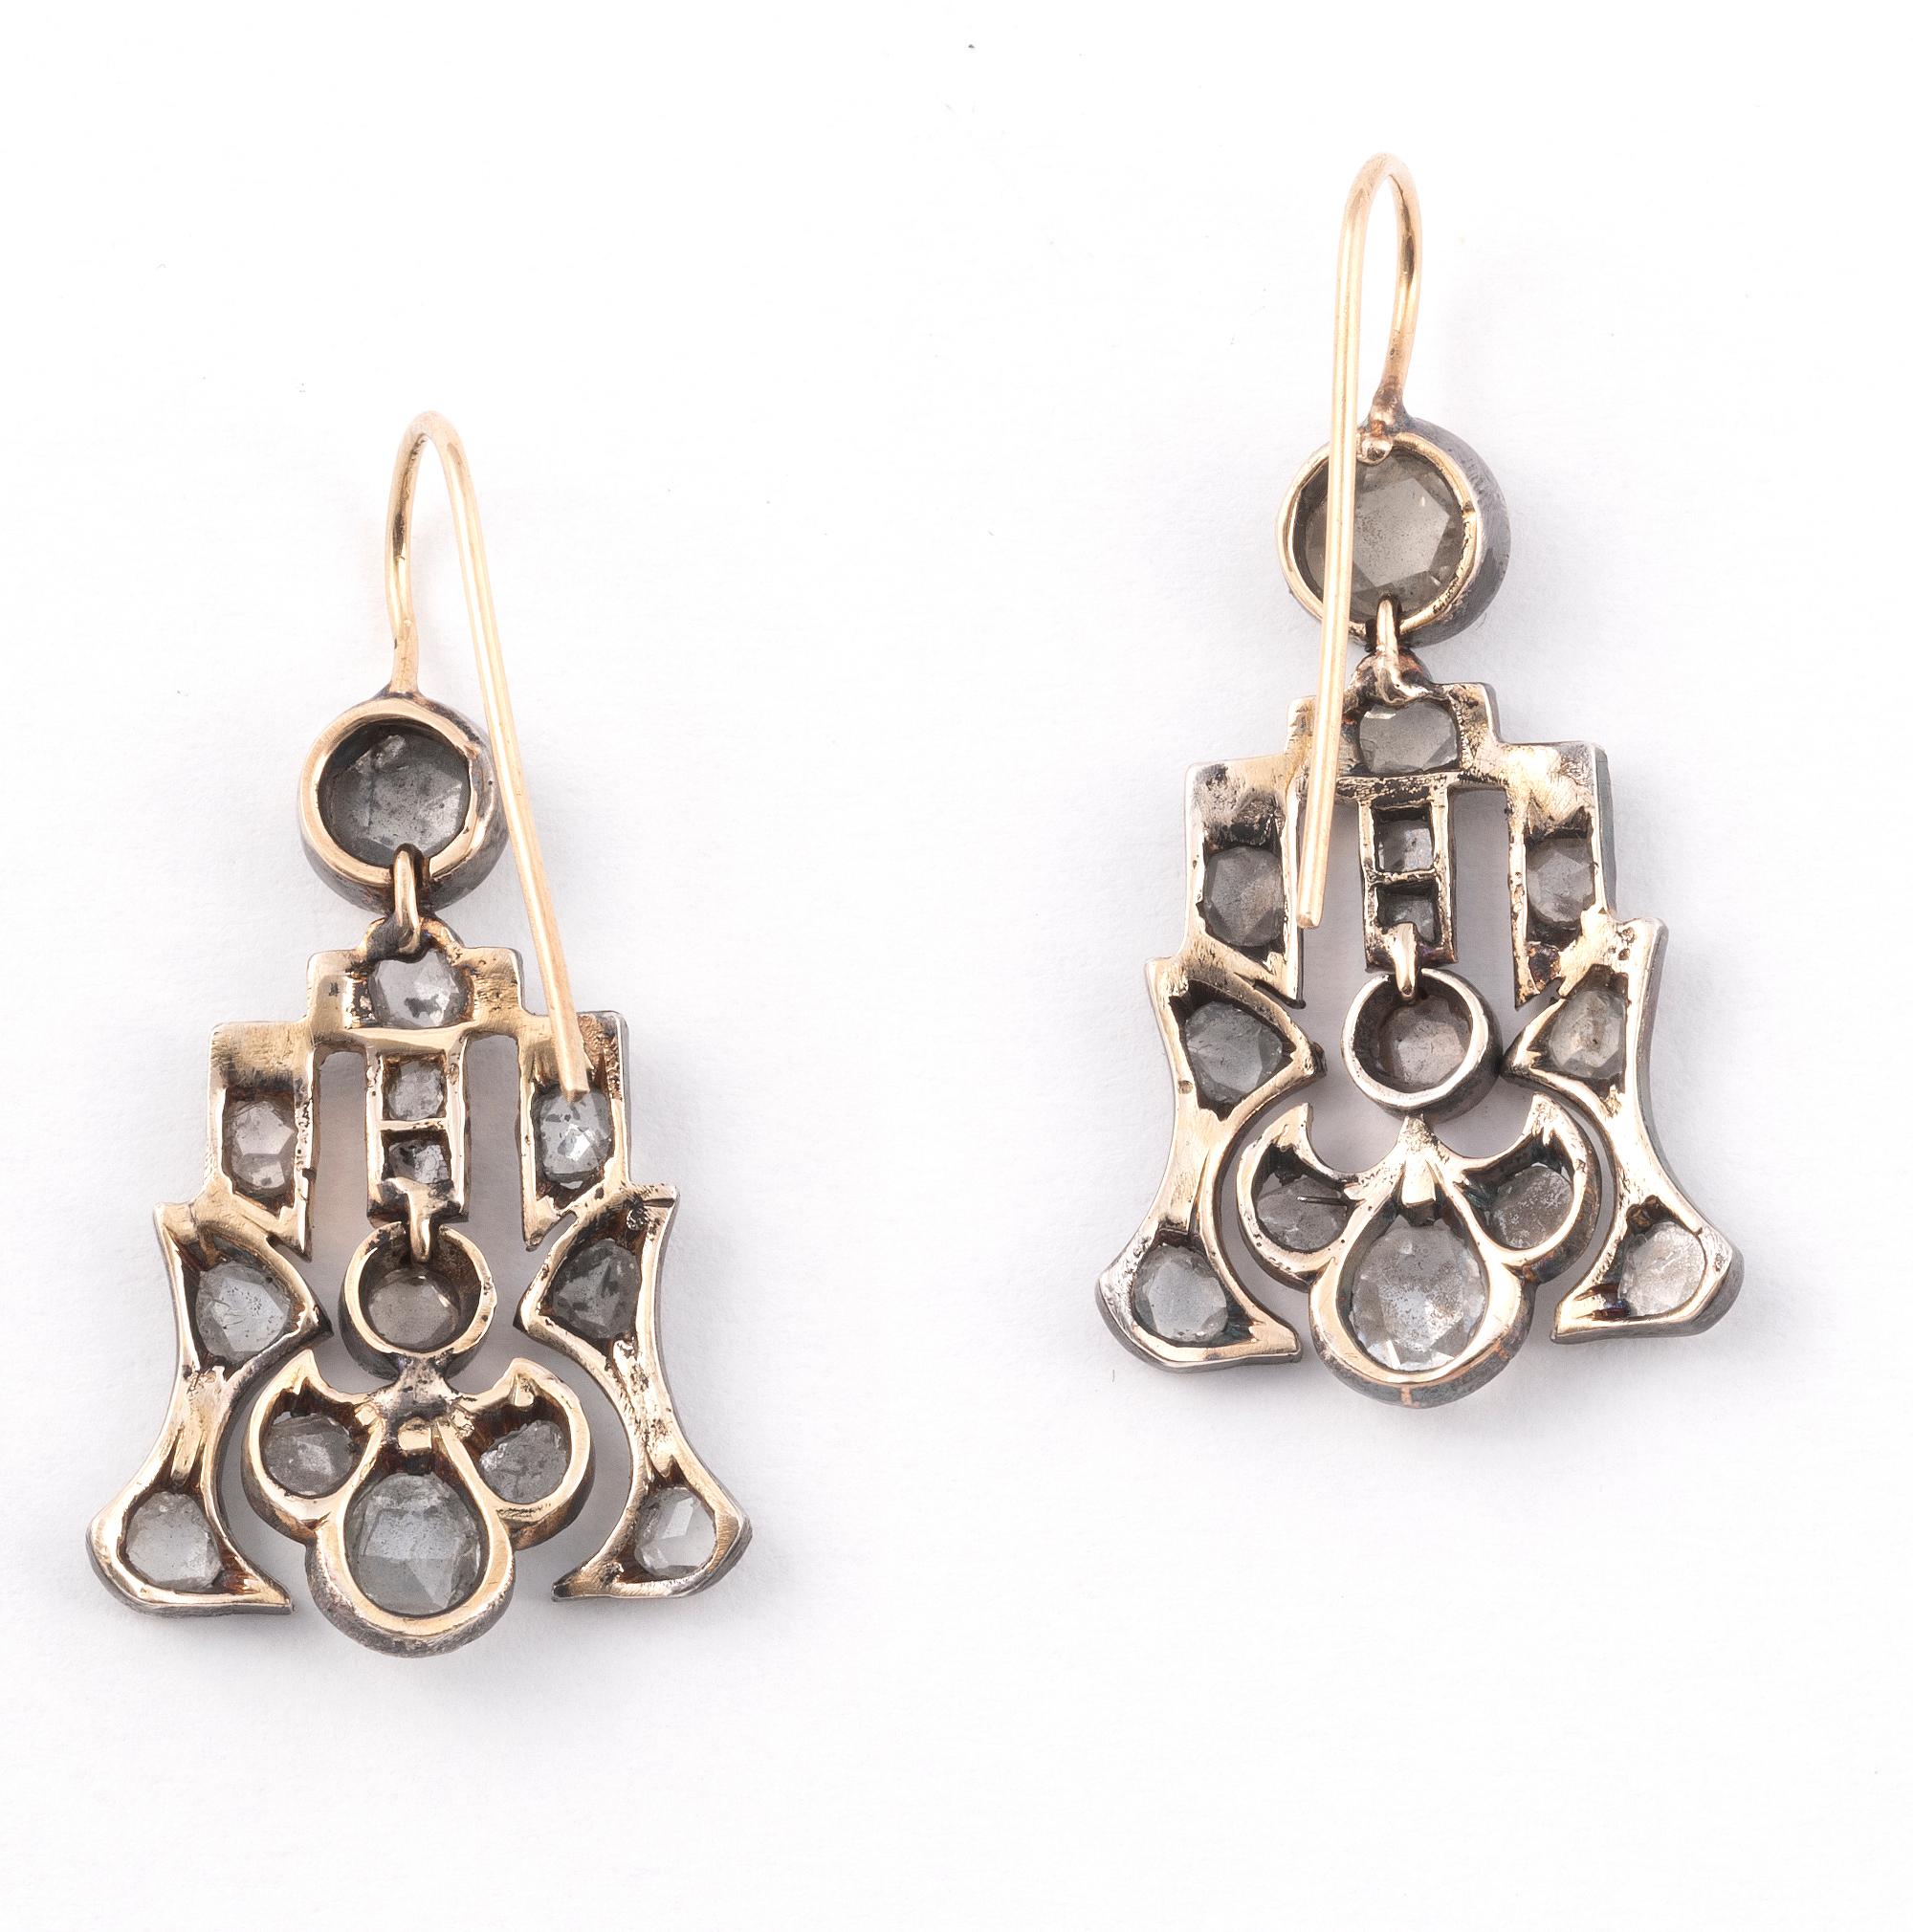 A Pair of late 19th century rose cut Diamond Silver and Gold  Earrings.
Length : 41 mm 
Weight: 8.03 gr